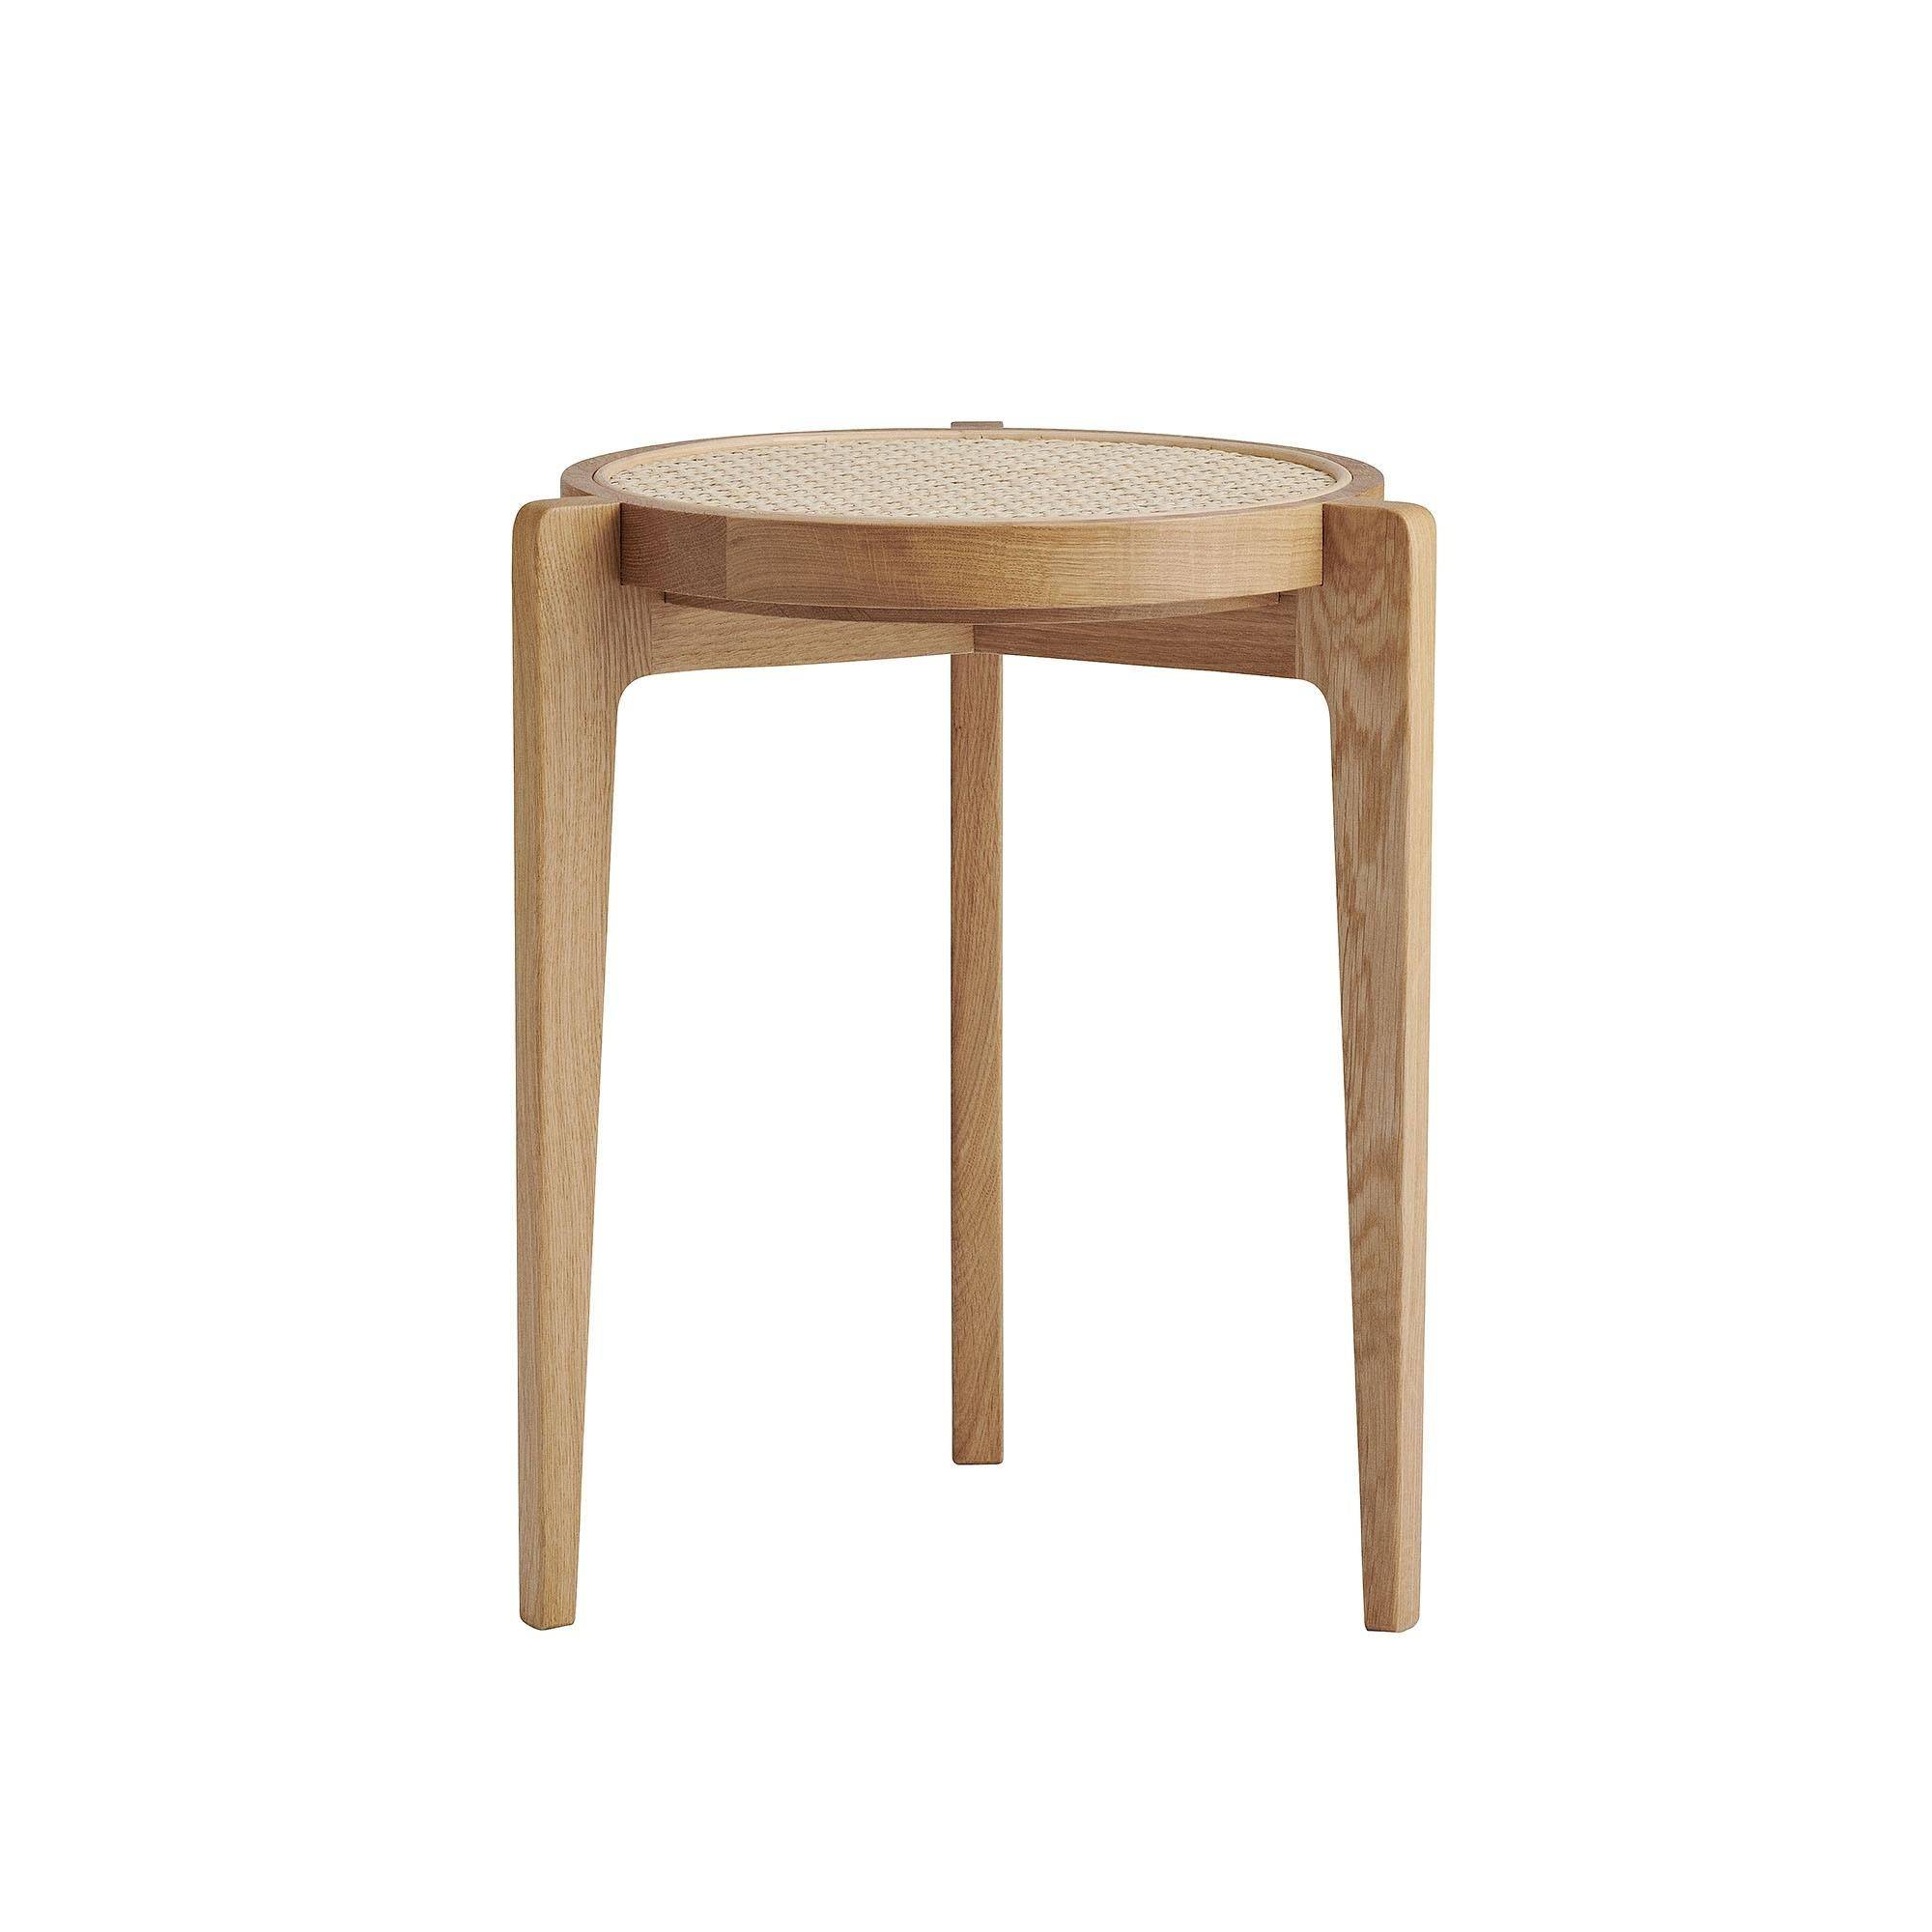 Le Roi Stool - THAT COOL LIVING